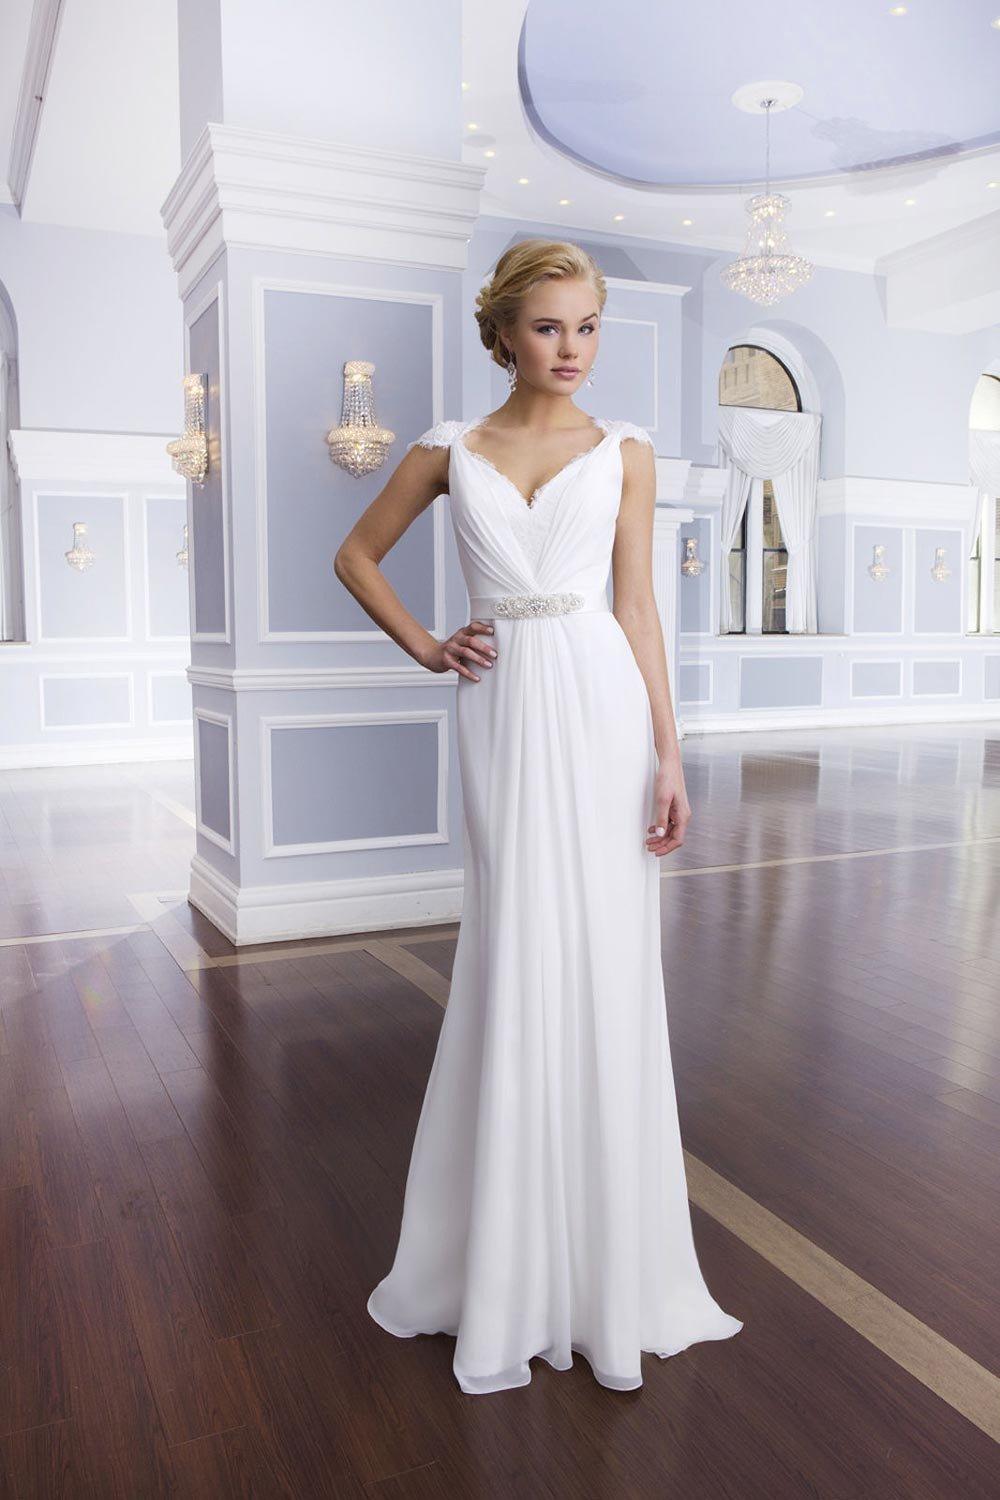 The Best Grecian Style Wedding Dresses - hitched.co.uk - hitched.co.uk